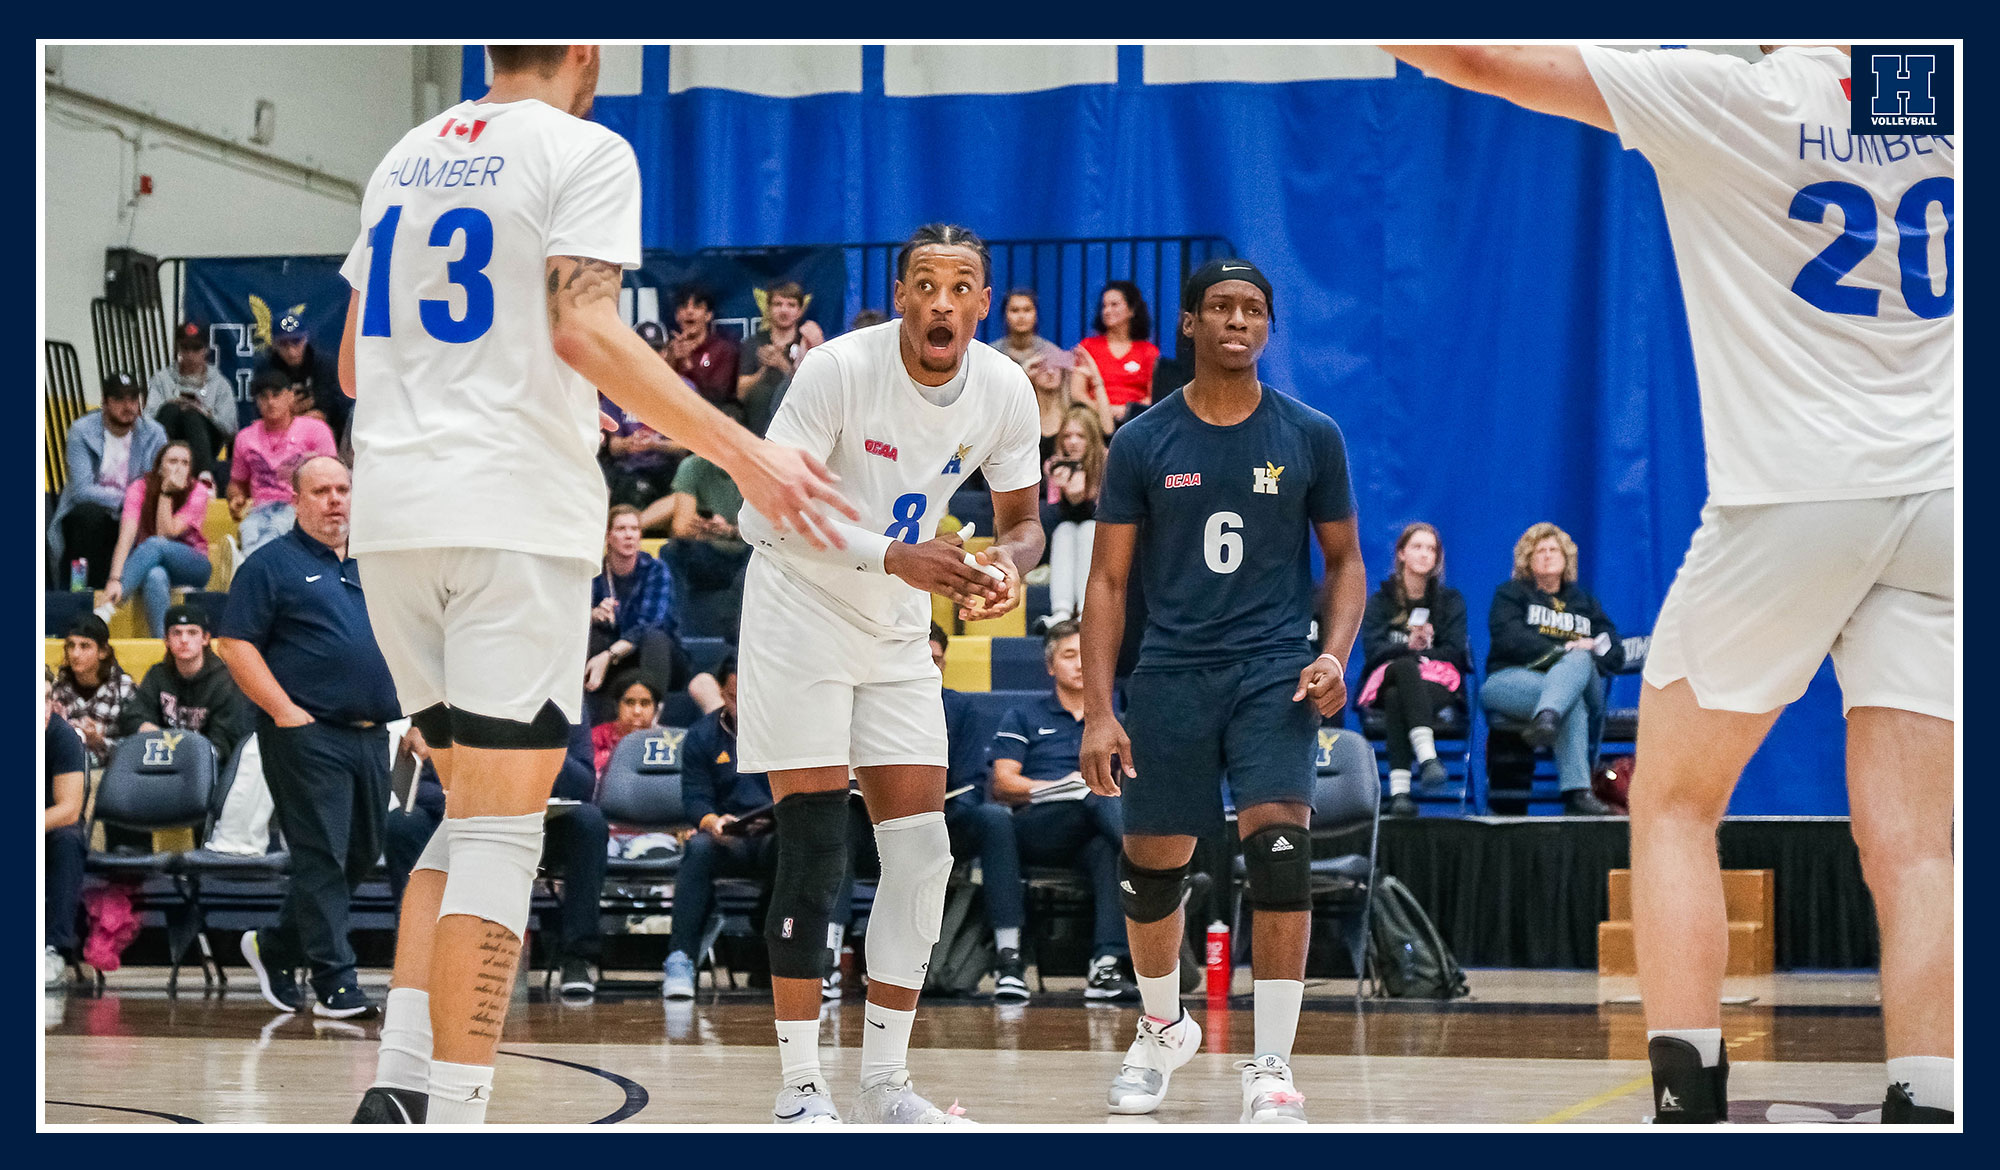 Men's Volleyball falls to Niagara in home opener